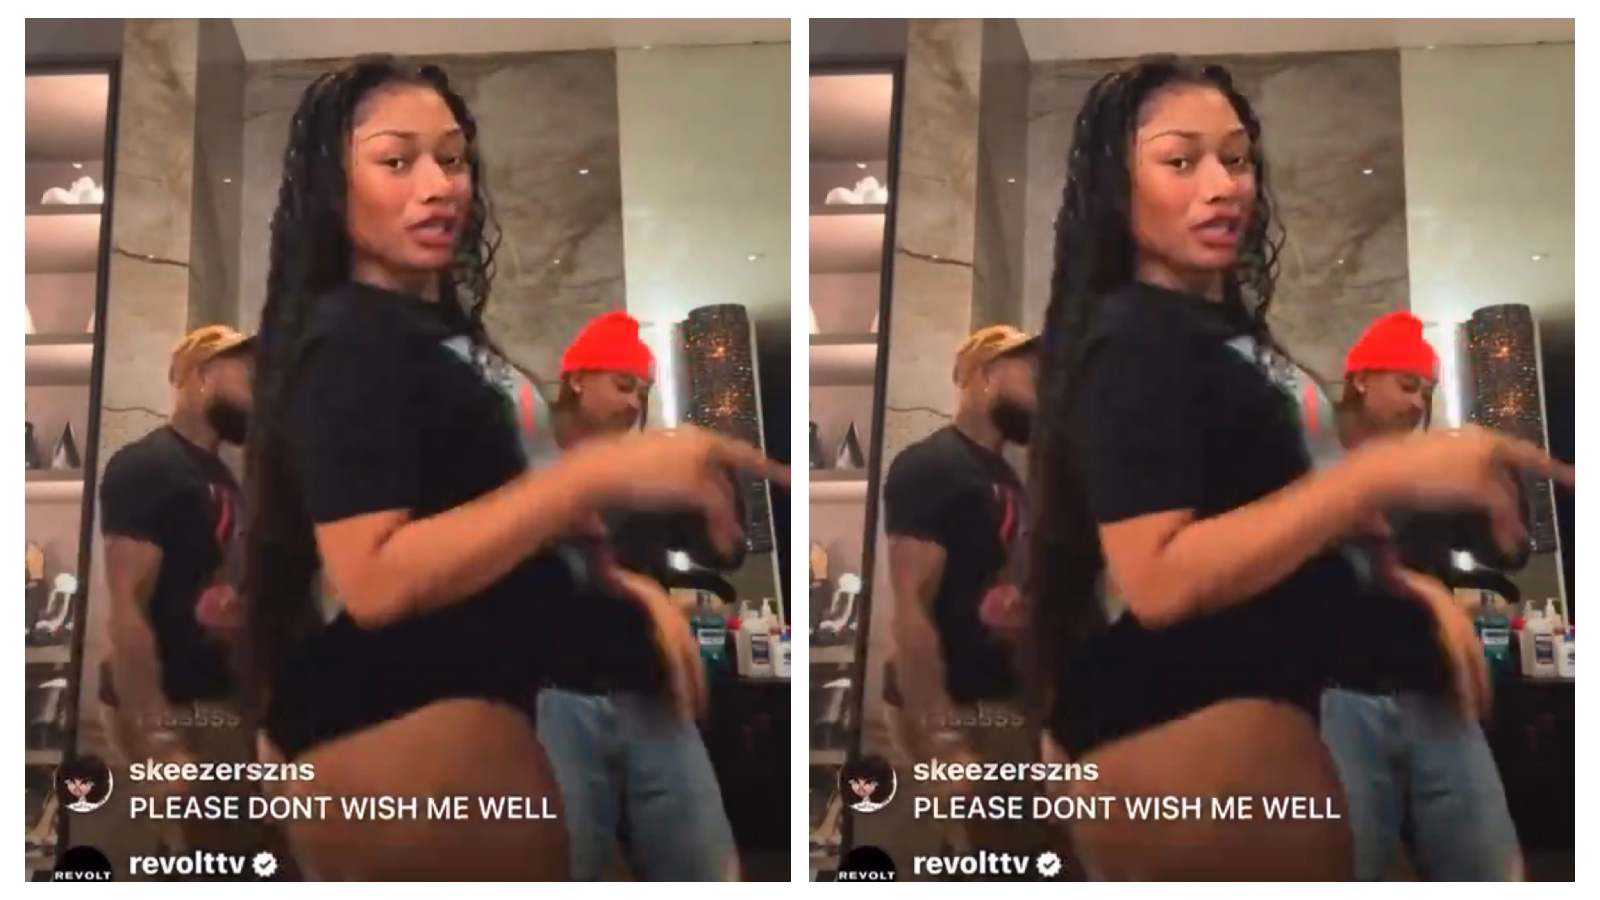 Megan Thee Stallion Twerking On Instagram Live With Her Male Friends To Celebrate HISS Going #1 On Billboard Hot 100